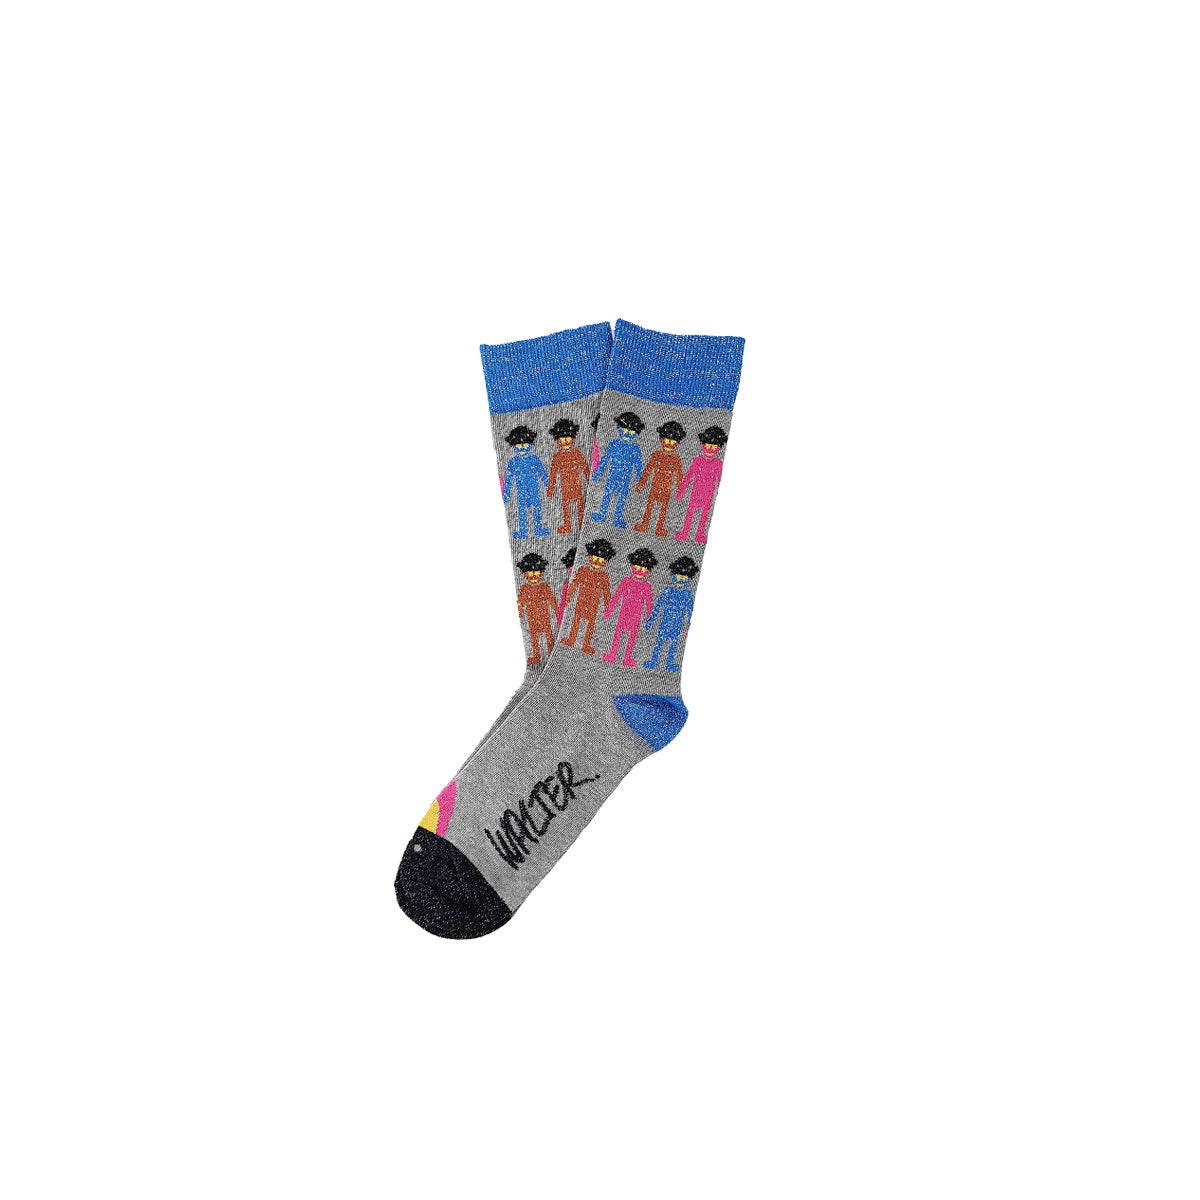 Aliens Unite Socks (LUREX) - Why are you here?